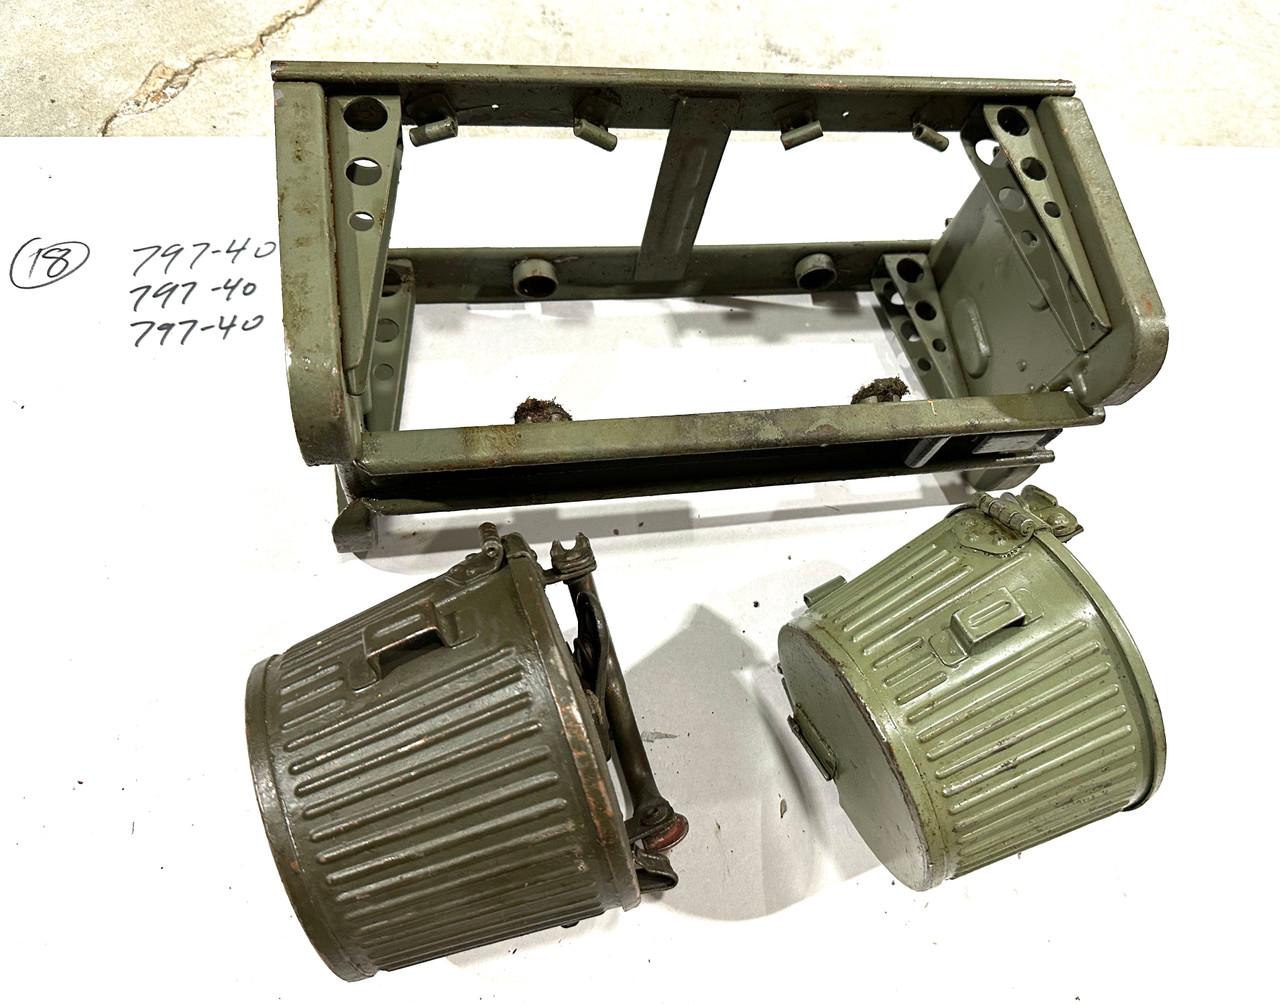 230909-18:  Original WW2 dated Basket Drum and Carrier Set  (Yugo Repainted)  (SHIPS FREE in Lower 48)